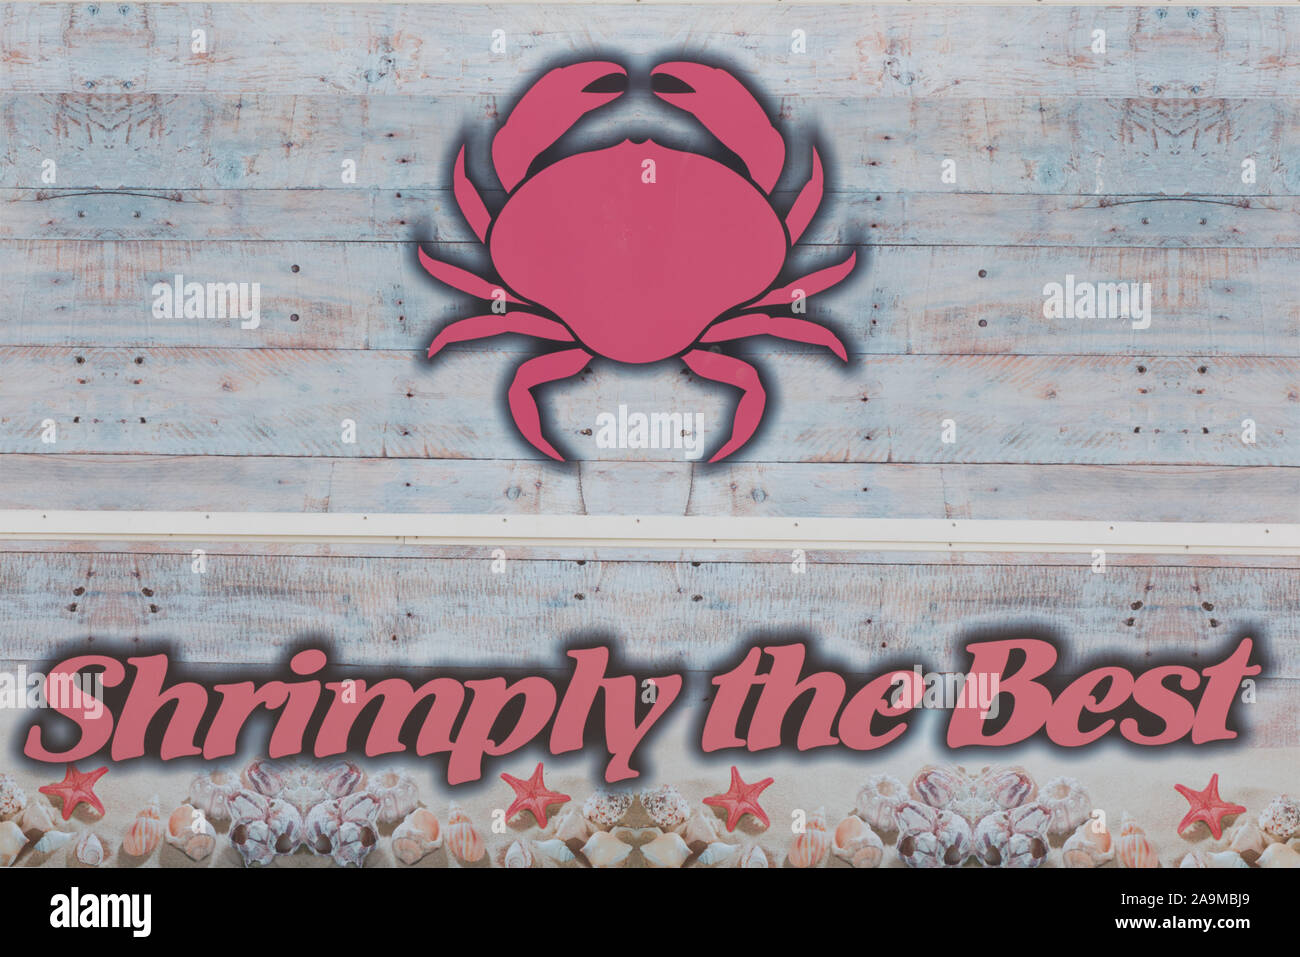 shrimply the best Shrimp hut sign on the beach at great yarmouth. Stock Photo